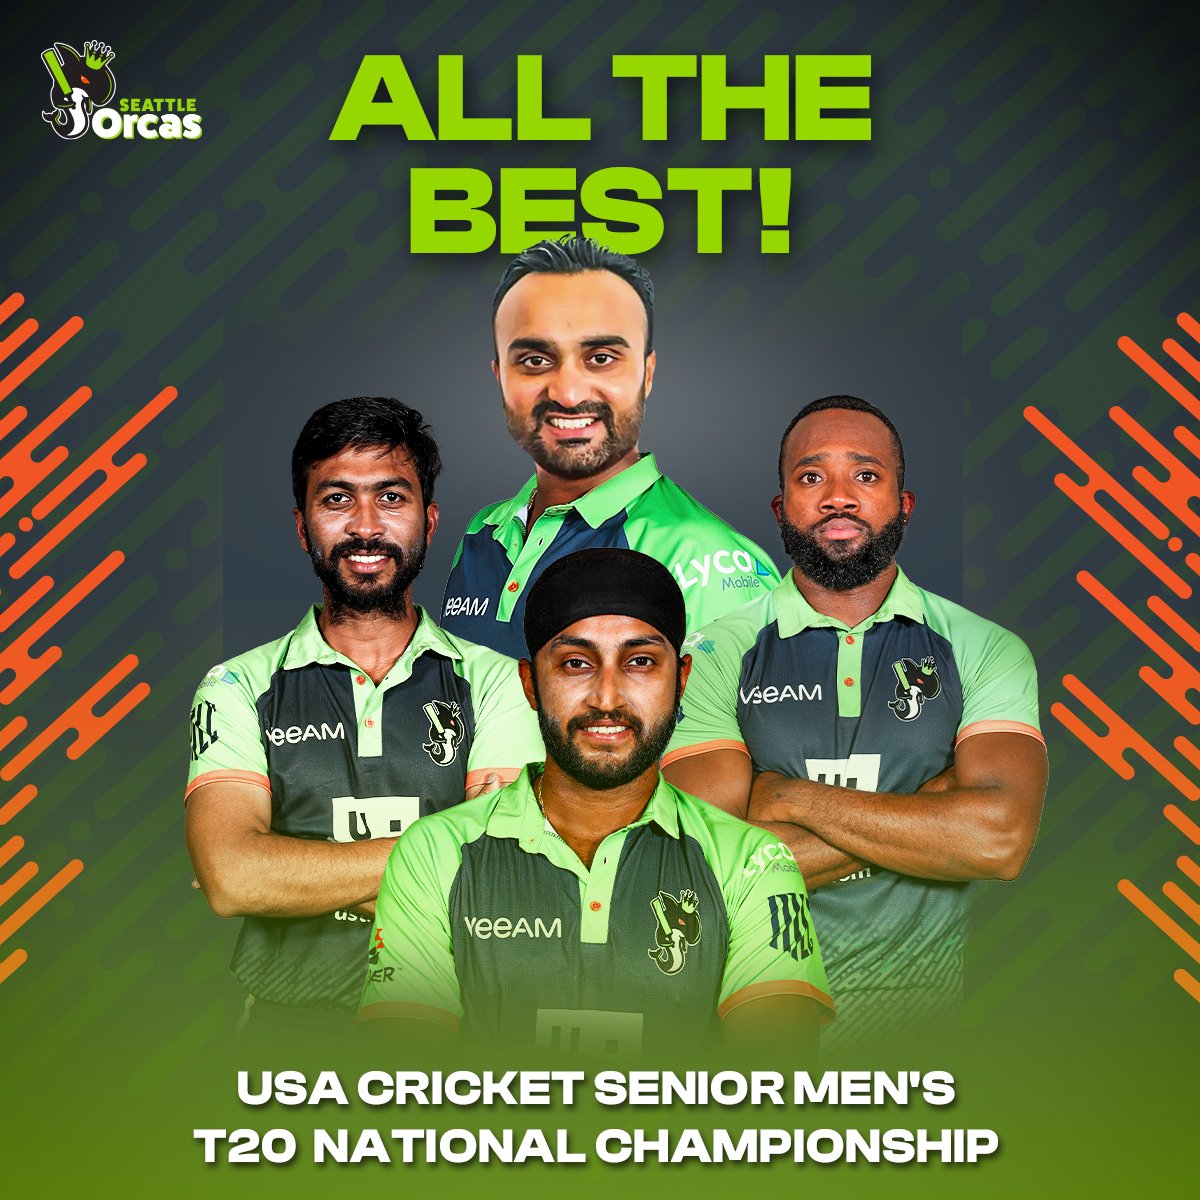 Geared up for their next challenge 💪

Best wishes for a great tournament, guys 💚

#SeattleOrcas #MLC #MajorLeagueCricket #USACT20Nats2024 #WeAreUSACricket